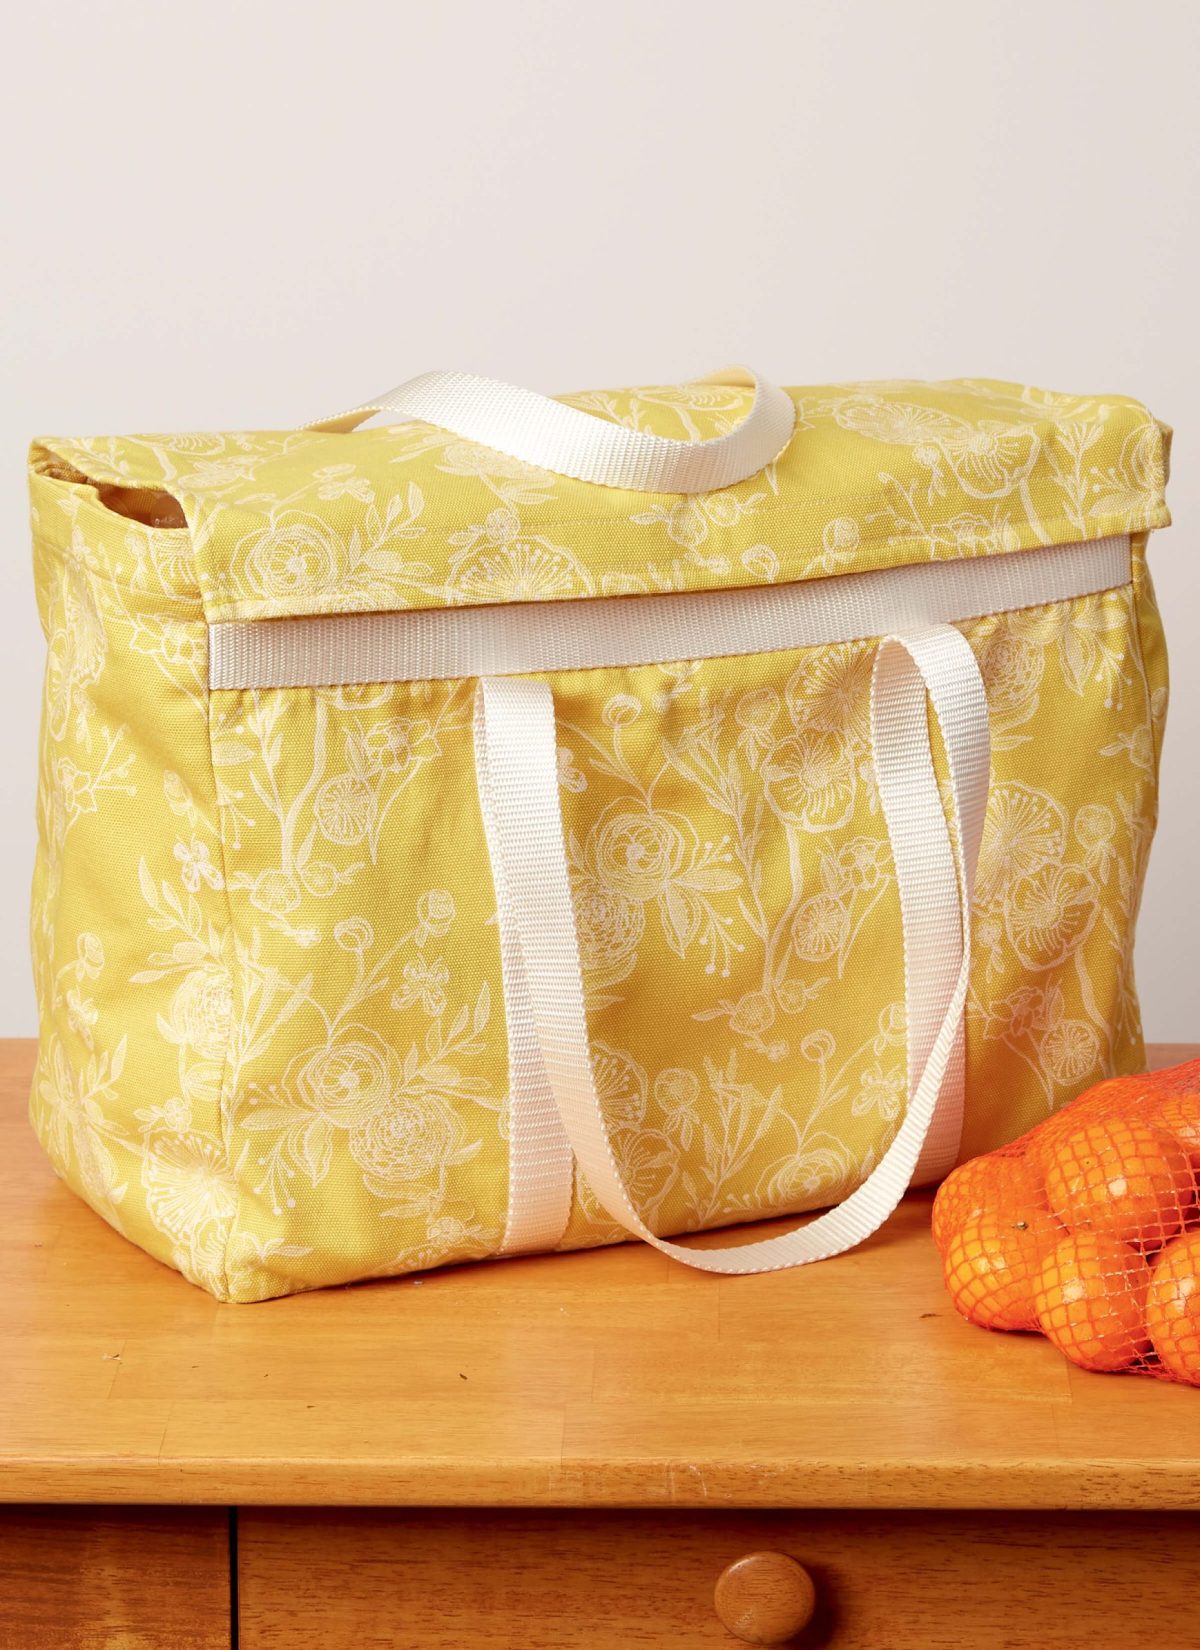 McCall's Sewing Pattern M8236 Fruit and Vegetable Bags, Mop Pad, Coffee Filters, Bin and Bag